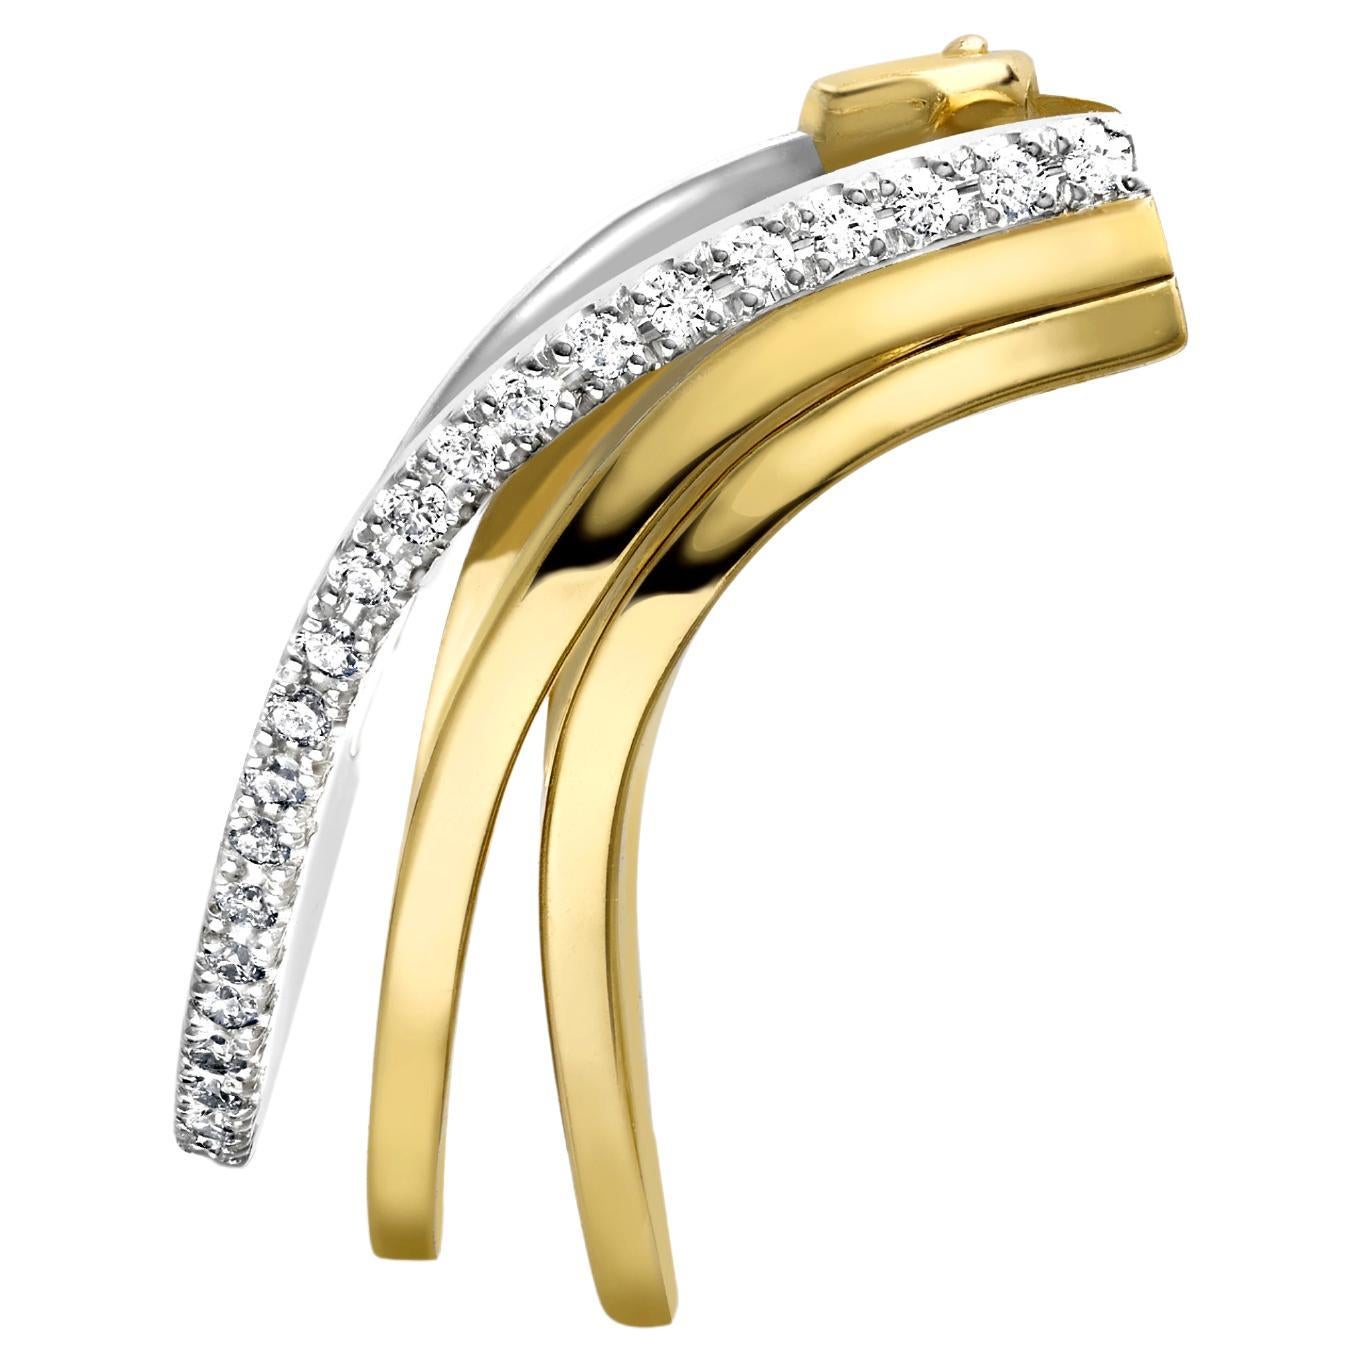 STRATUM EAR CUFF White and yellow gold with single diamond edge by Liv Luttrell